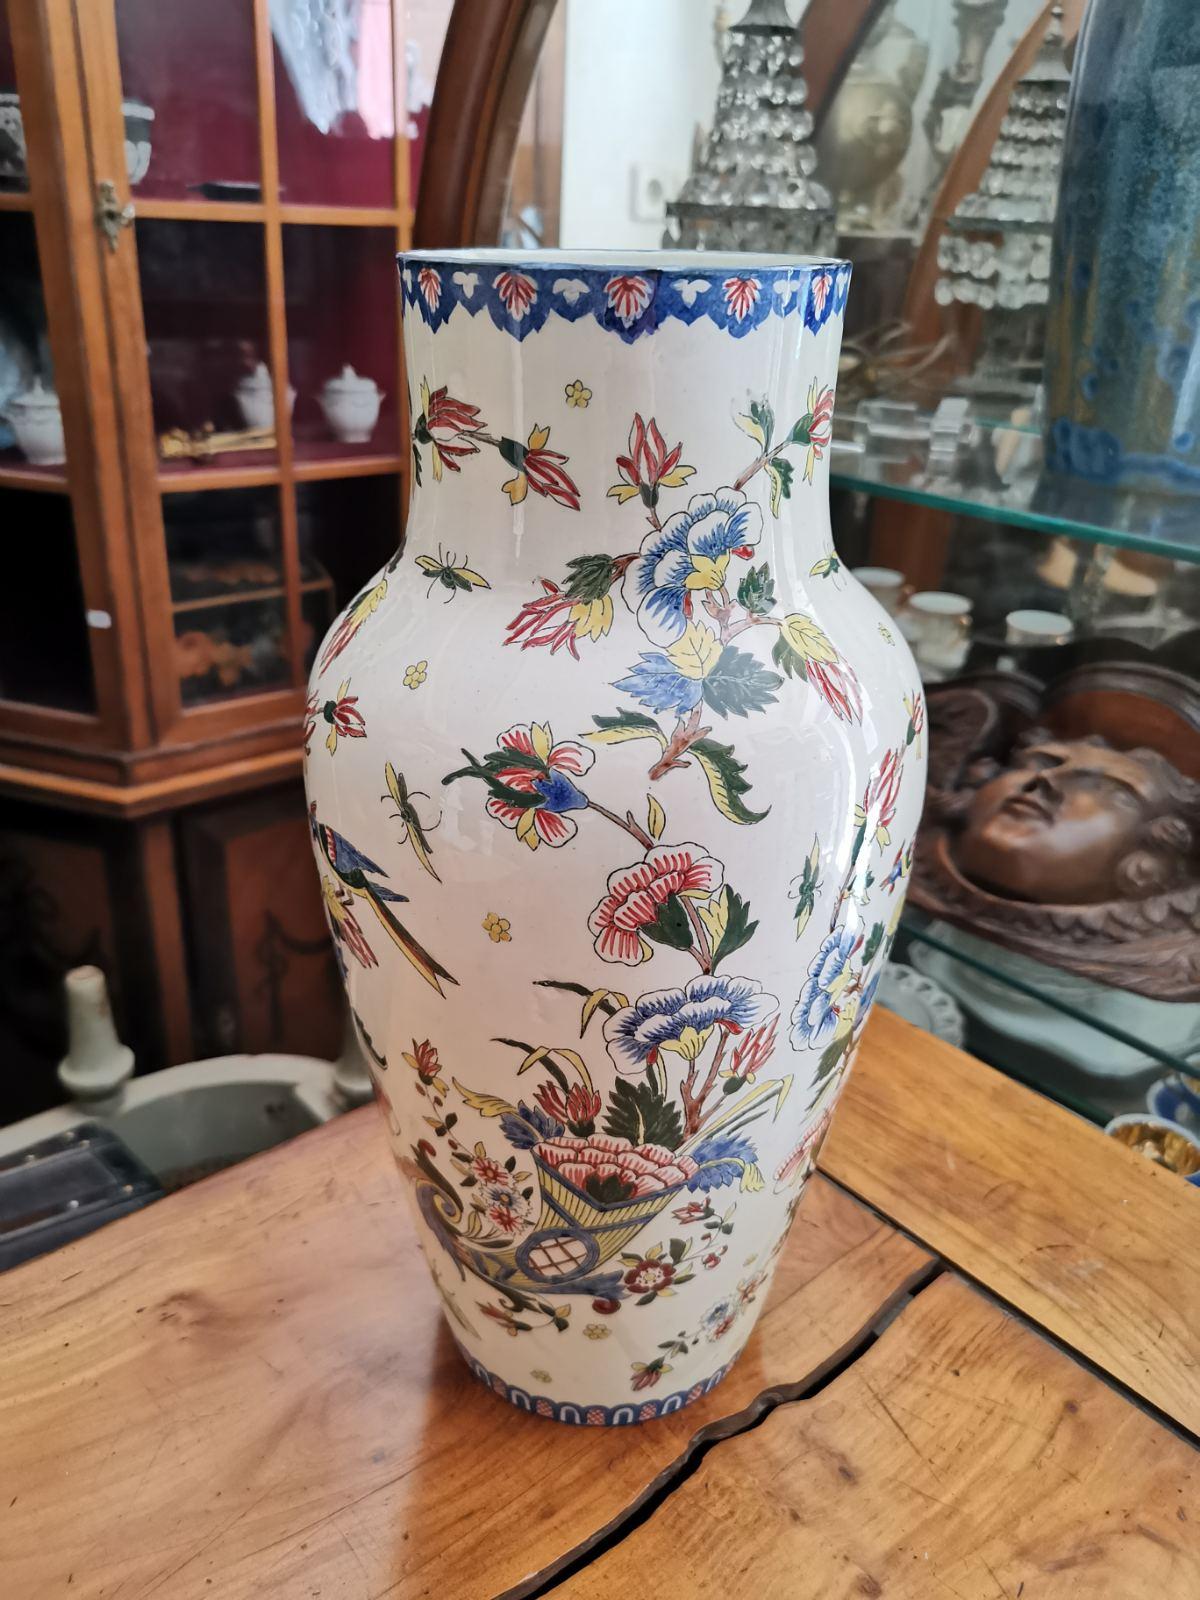 Pair of beautiful French large hand painted ceramic vases marked and numbered by Gien. Very detailed decoration with birds and flowers in vivid colors.
Great condition with no restaurations.
France, circa 1886.